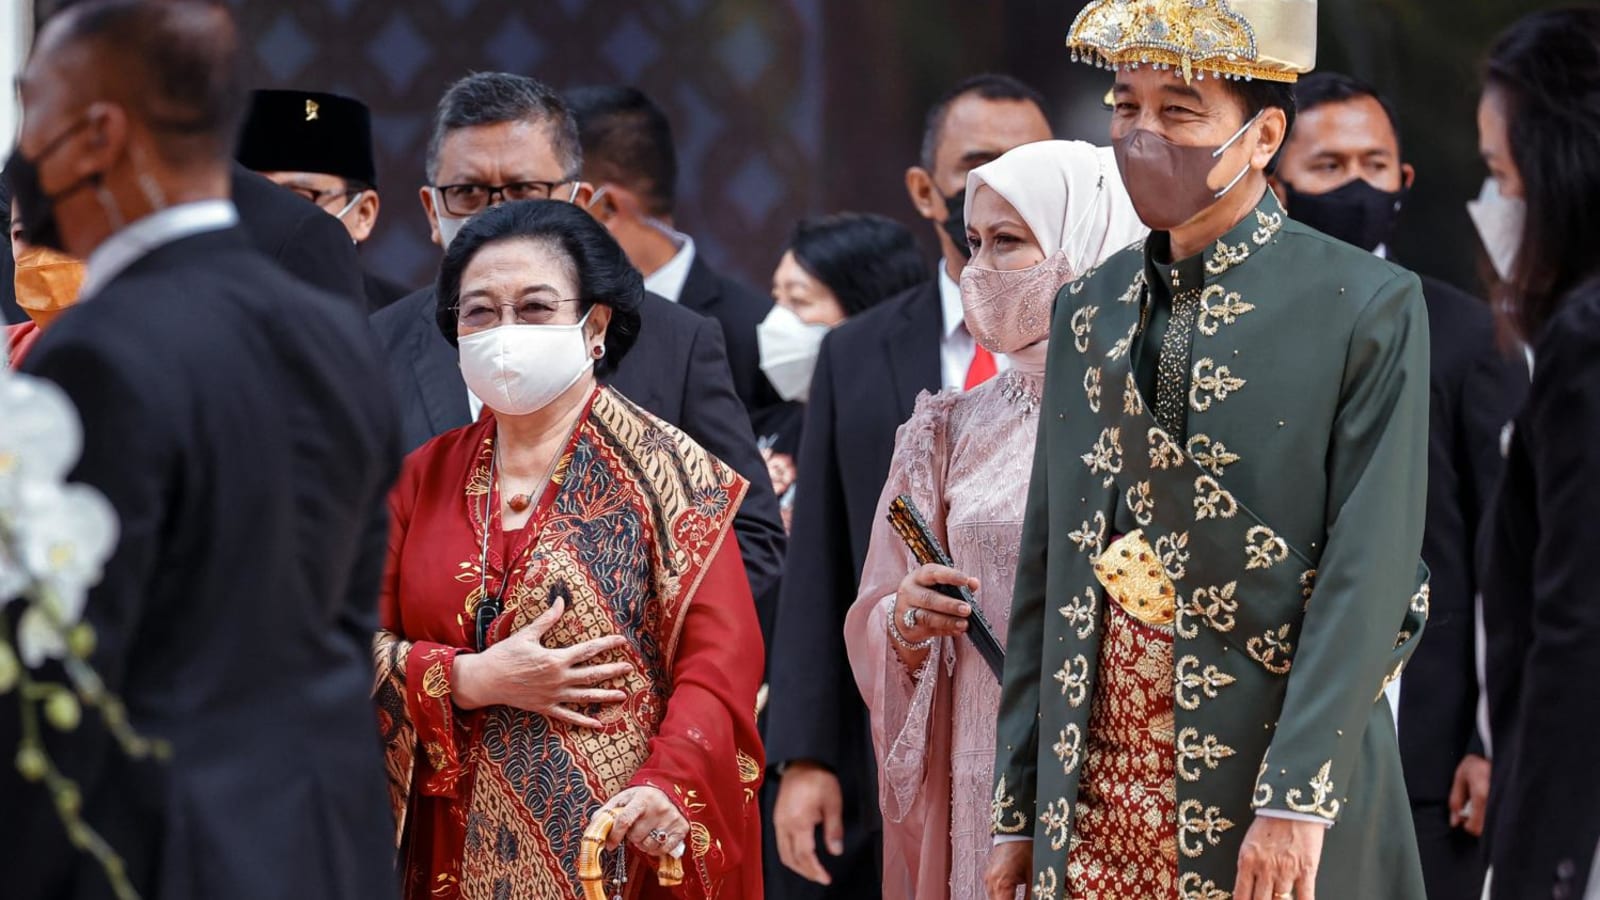 Commentary: Battle of Indonesia’s kingmakers - a rift between Jokowi and Megawati?